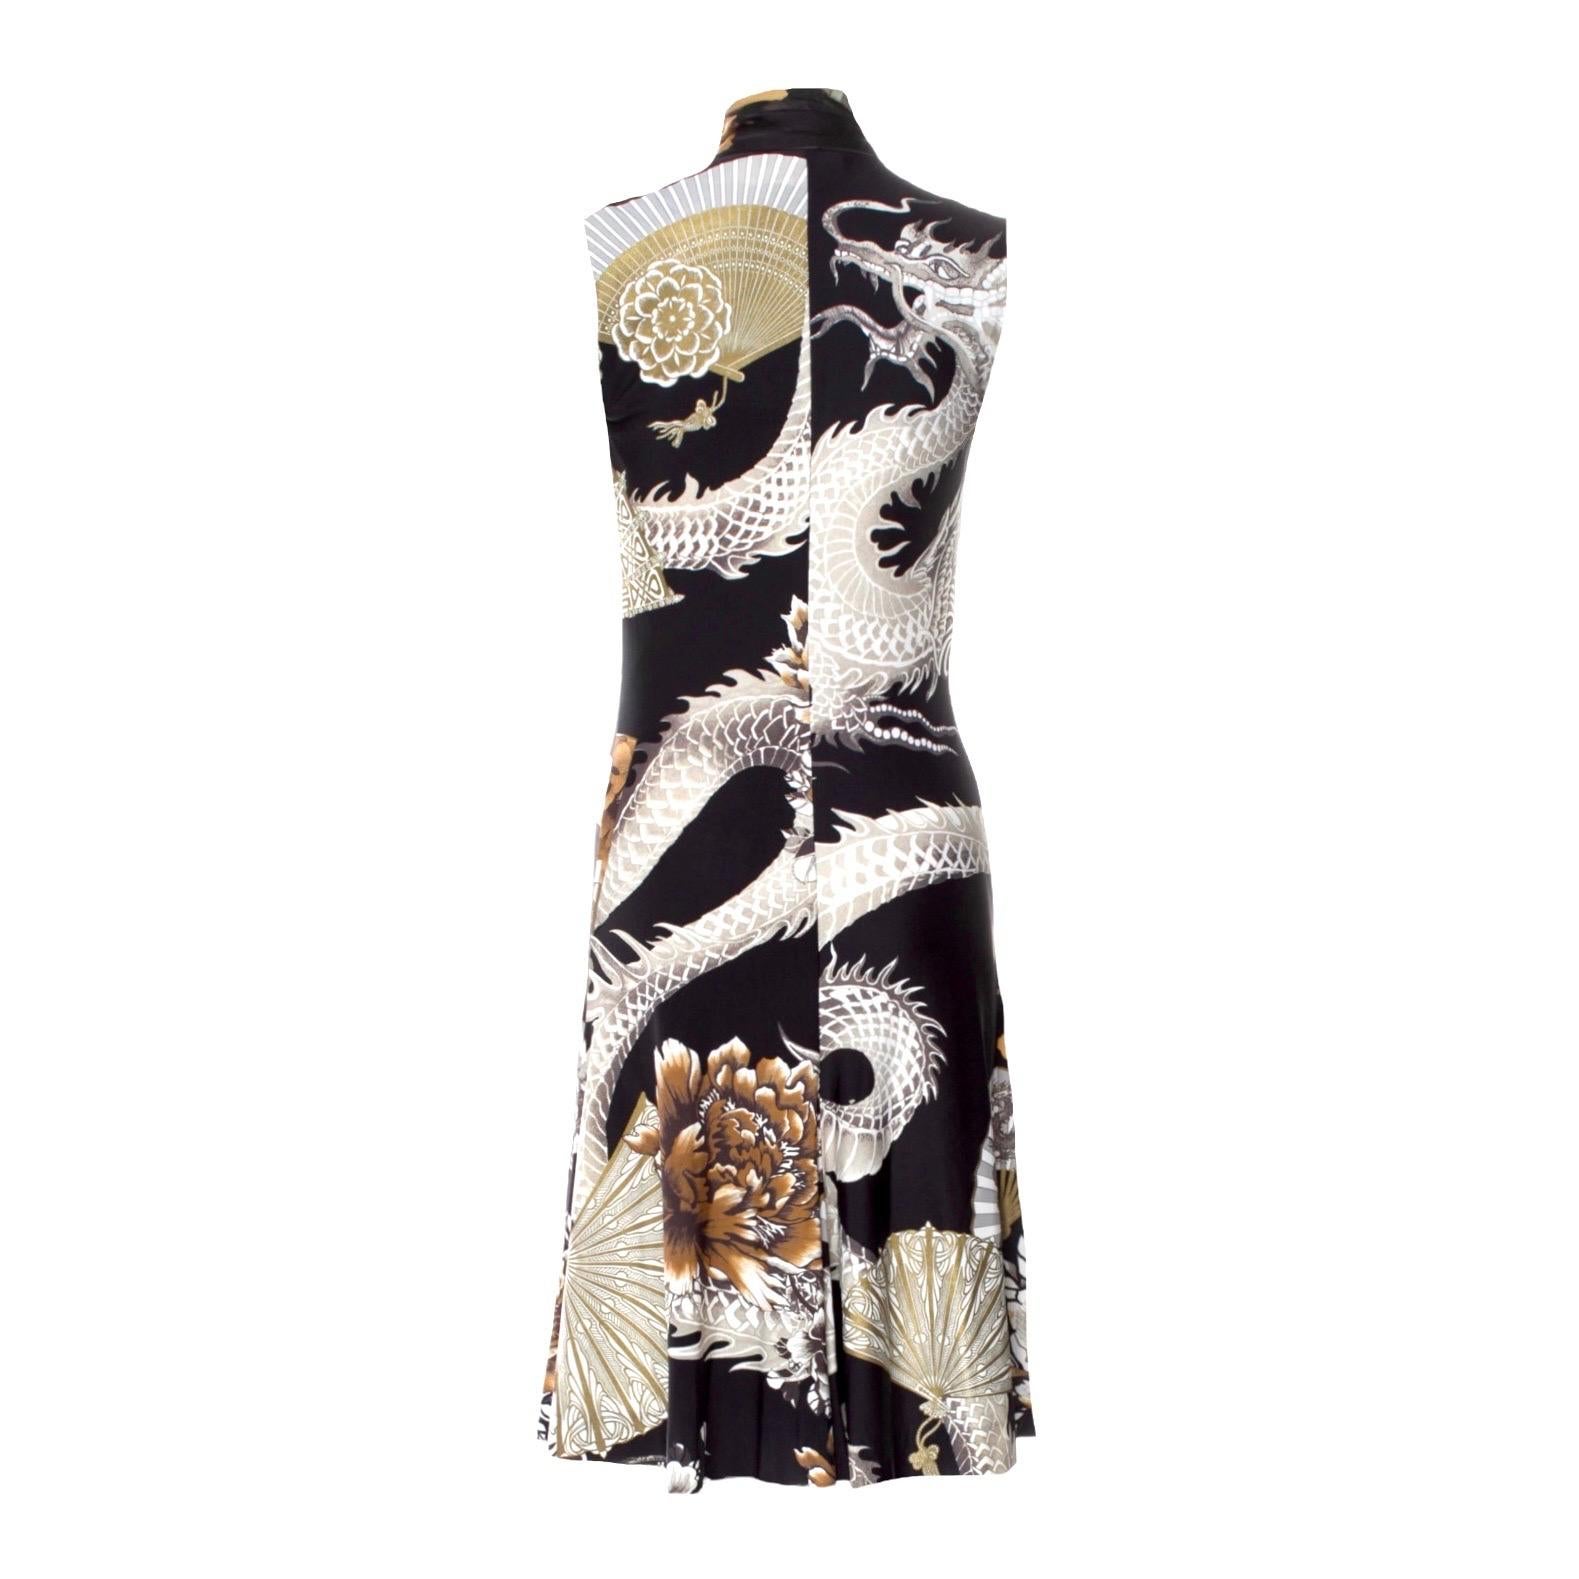 A stunning ROBERTO CAVALLI dress that will last you for years
From the most prestigious ROBERTO CAVALLI main line
From the gorgeous F/W 2006 collection
Chinoiserie print with dragons, fans
Gold-accented details
„Roberto Cavalli“ signature & logo